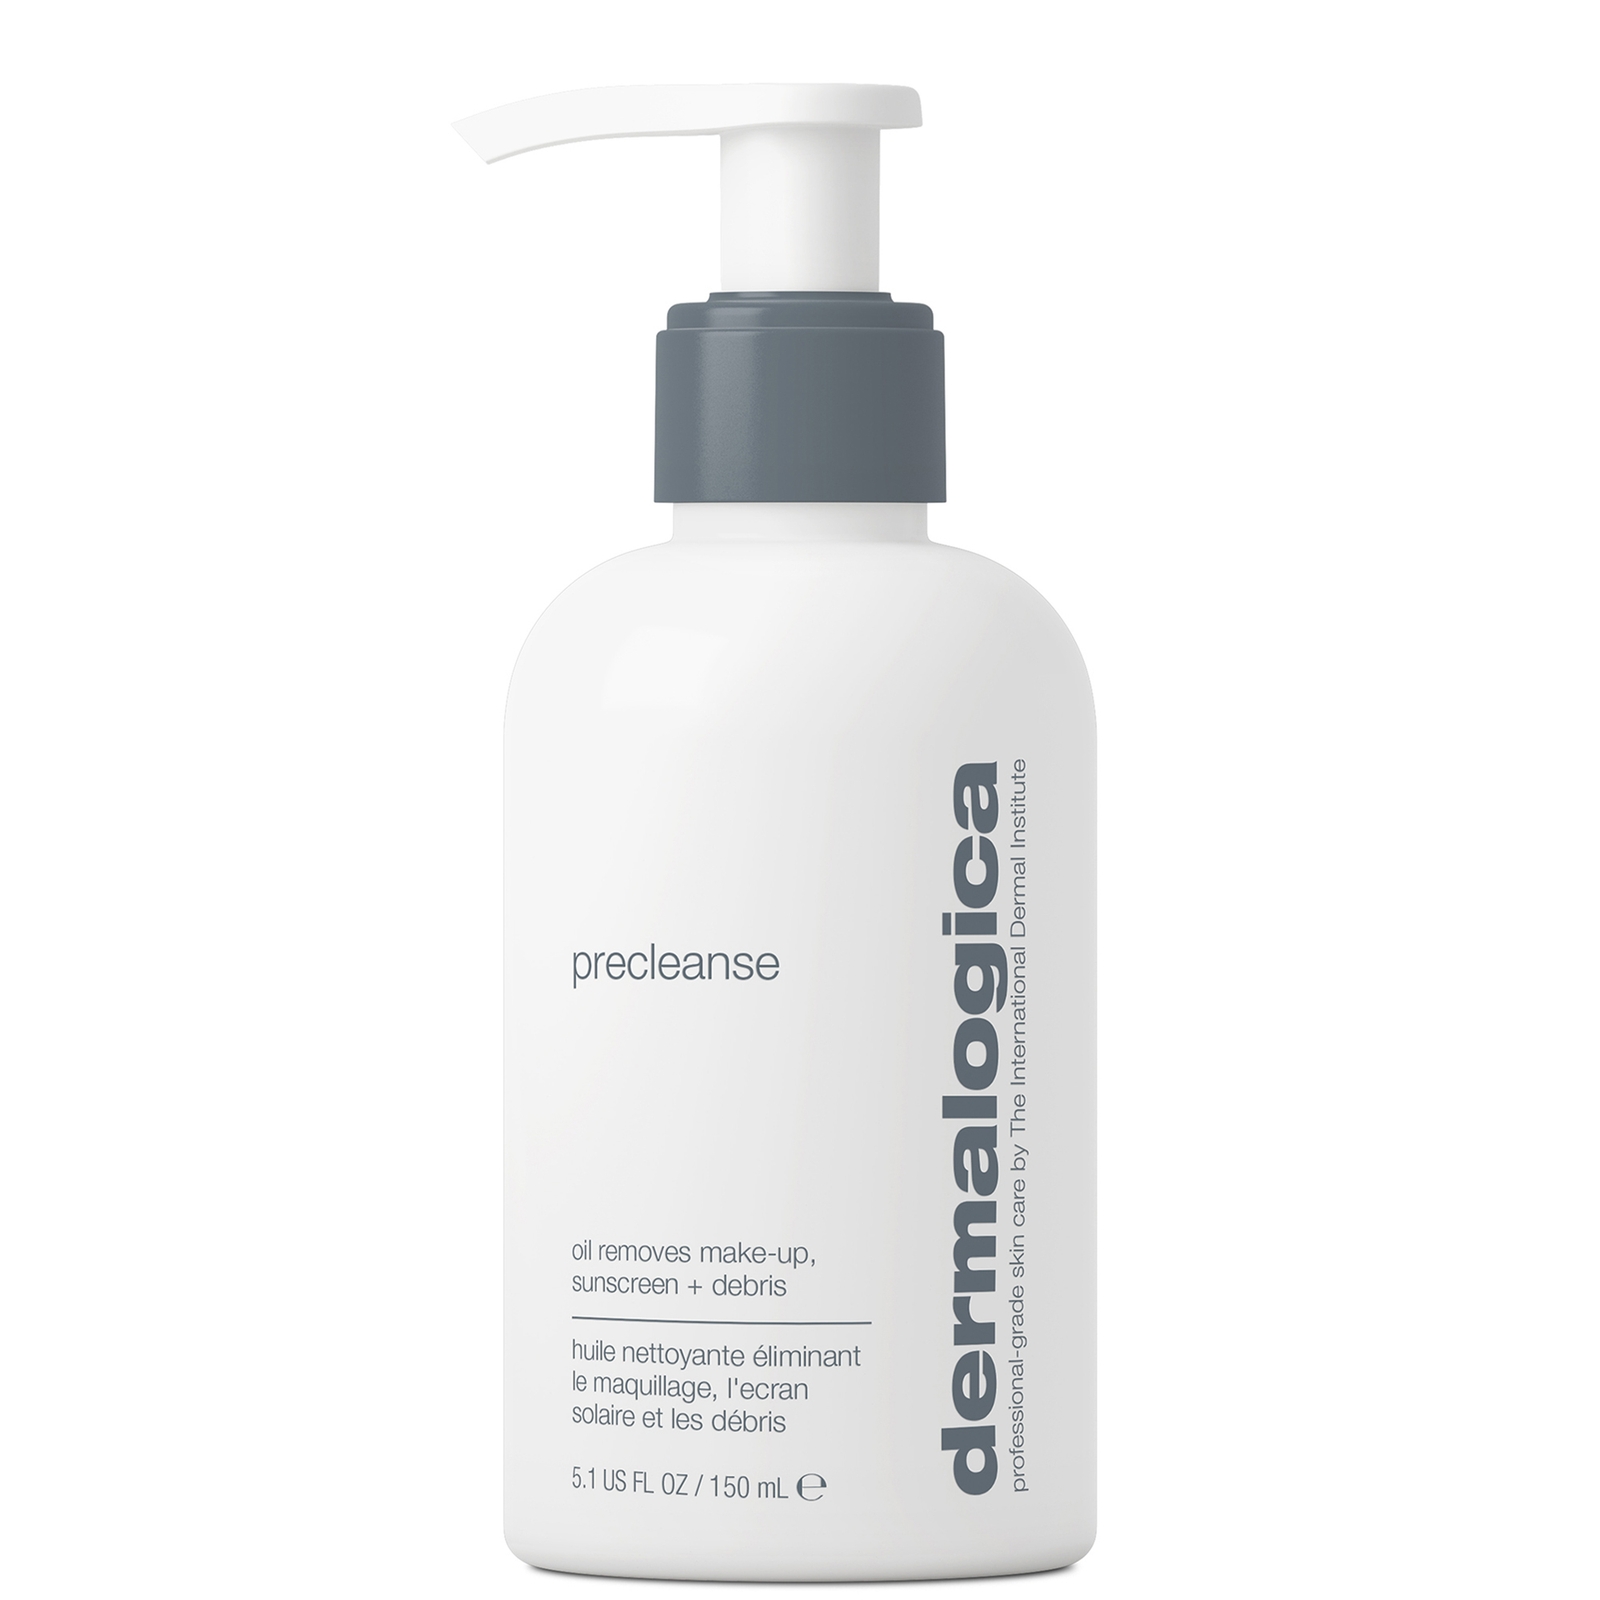 Photos - Facial / Body Cleansing Product Dermalogica Precleanse  (150ml)